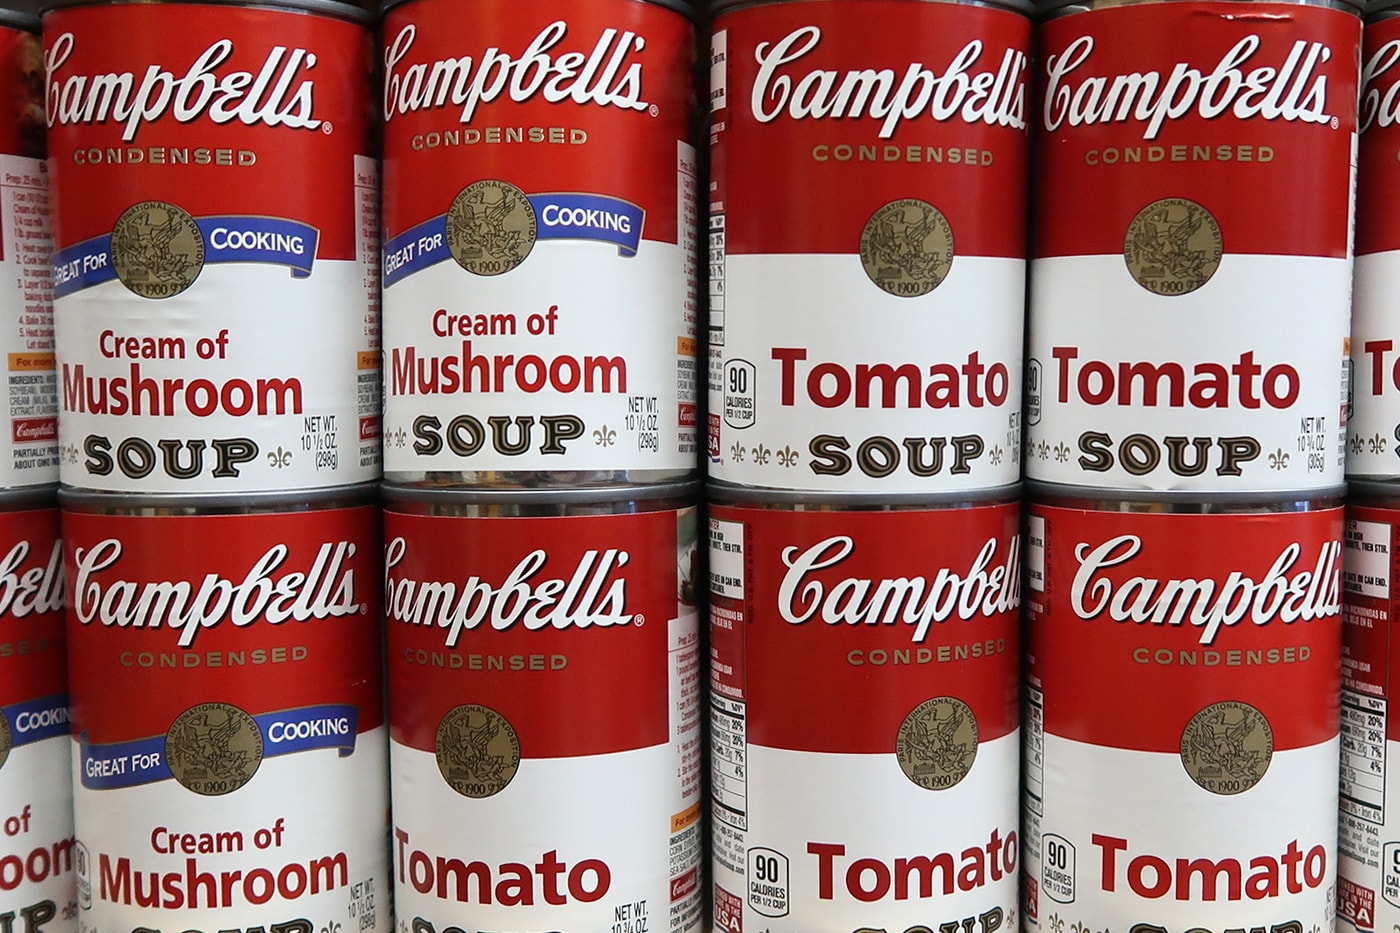 Campbell's first soup can redesign in 50 years news Sophia chang ntwrk andy warhol art soup food pop culture branding marketing 